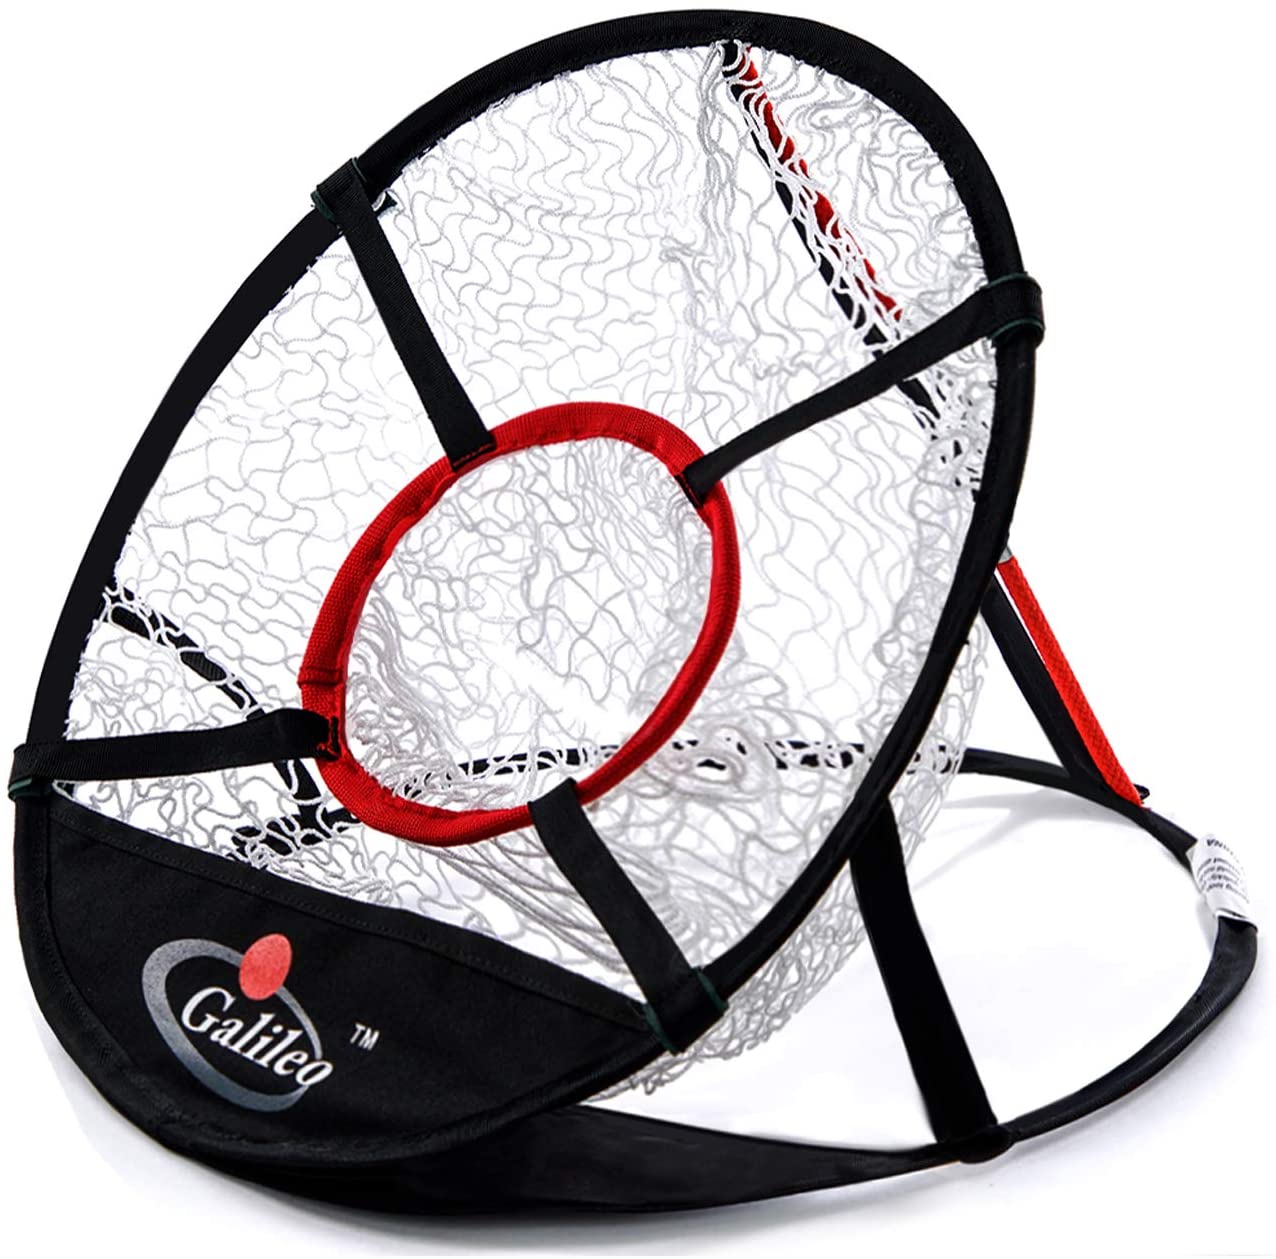 Galileo Sports Golf Chipping Net Golf Chipping Net Chipping Golf Chipping Practice Net Pop Up Golf Chipping Net Juego de golf Chipping Uso en interiores y exteriores